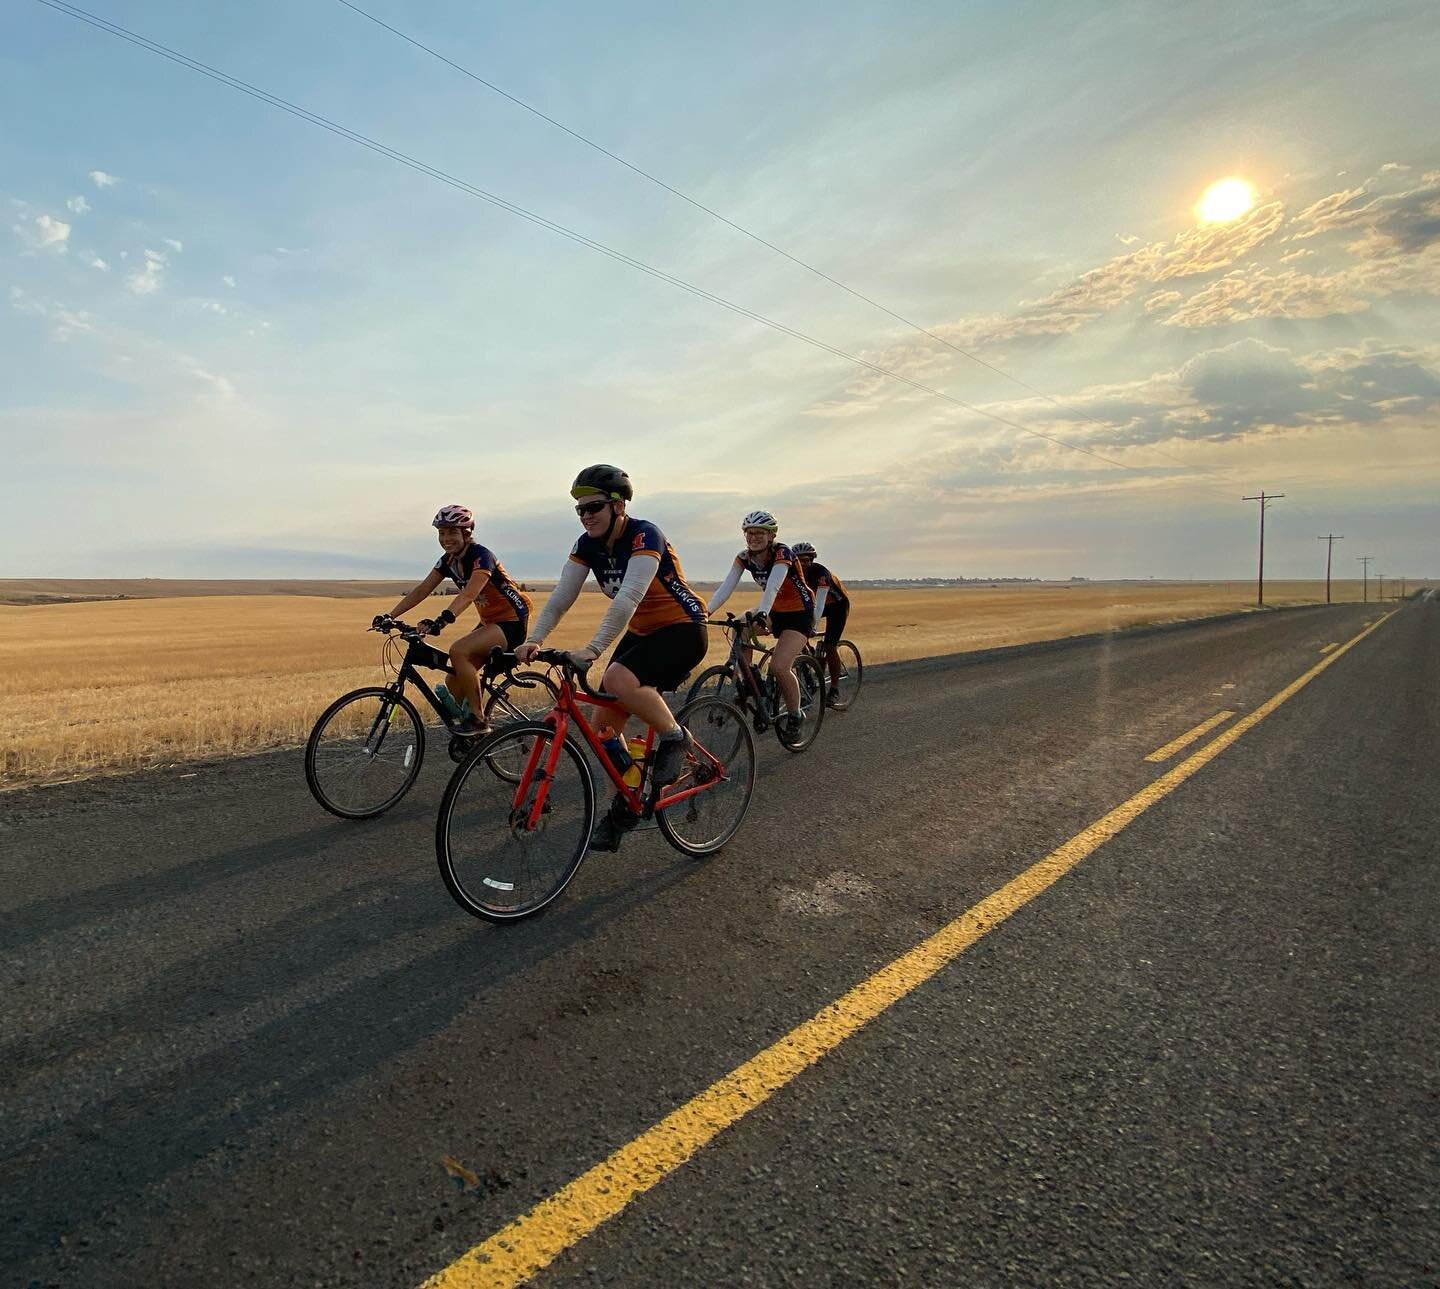 Day 60: We ventured out of Ritzville early morning and headed towards Othello, WA biking 57.5 miles! Throughout the ride we met some furry friends! 🐶🐱🐐
**Follow our team blog below**
http://illini4000.org/journals
.
.
.
.
#illini4000 #illini400020